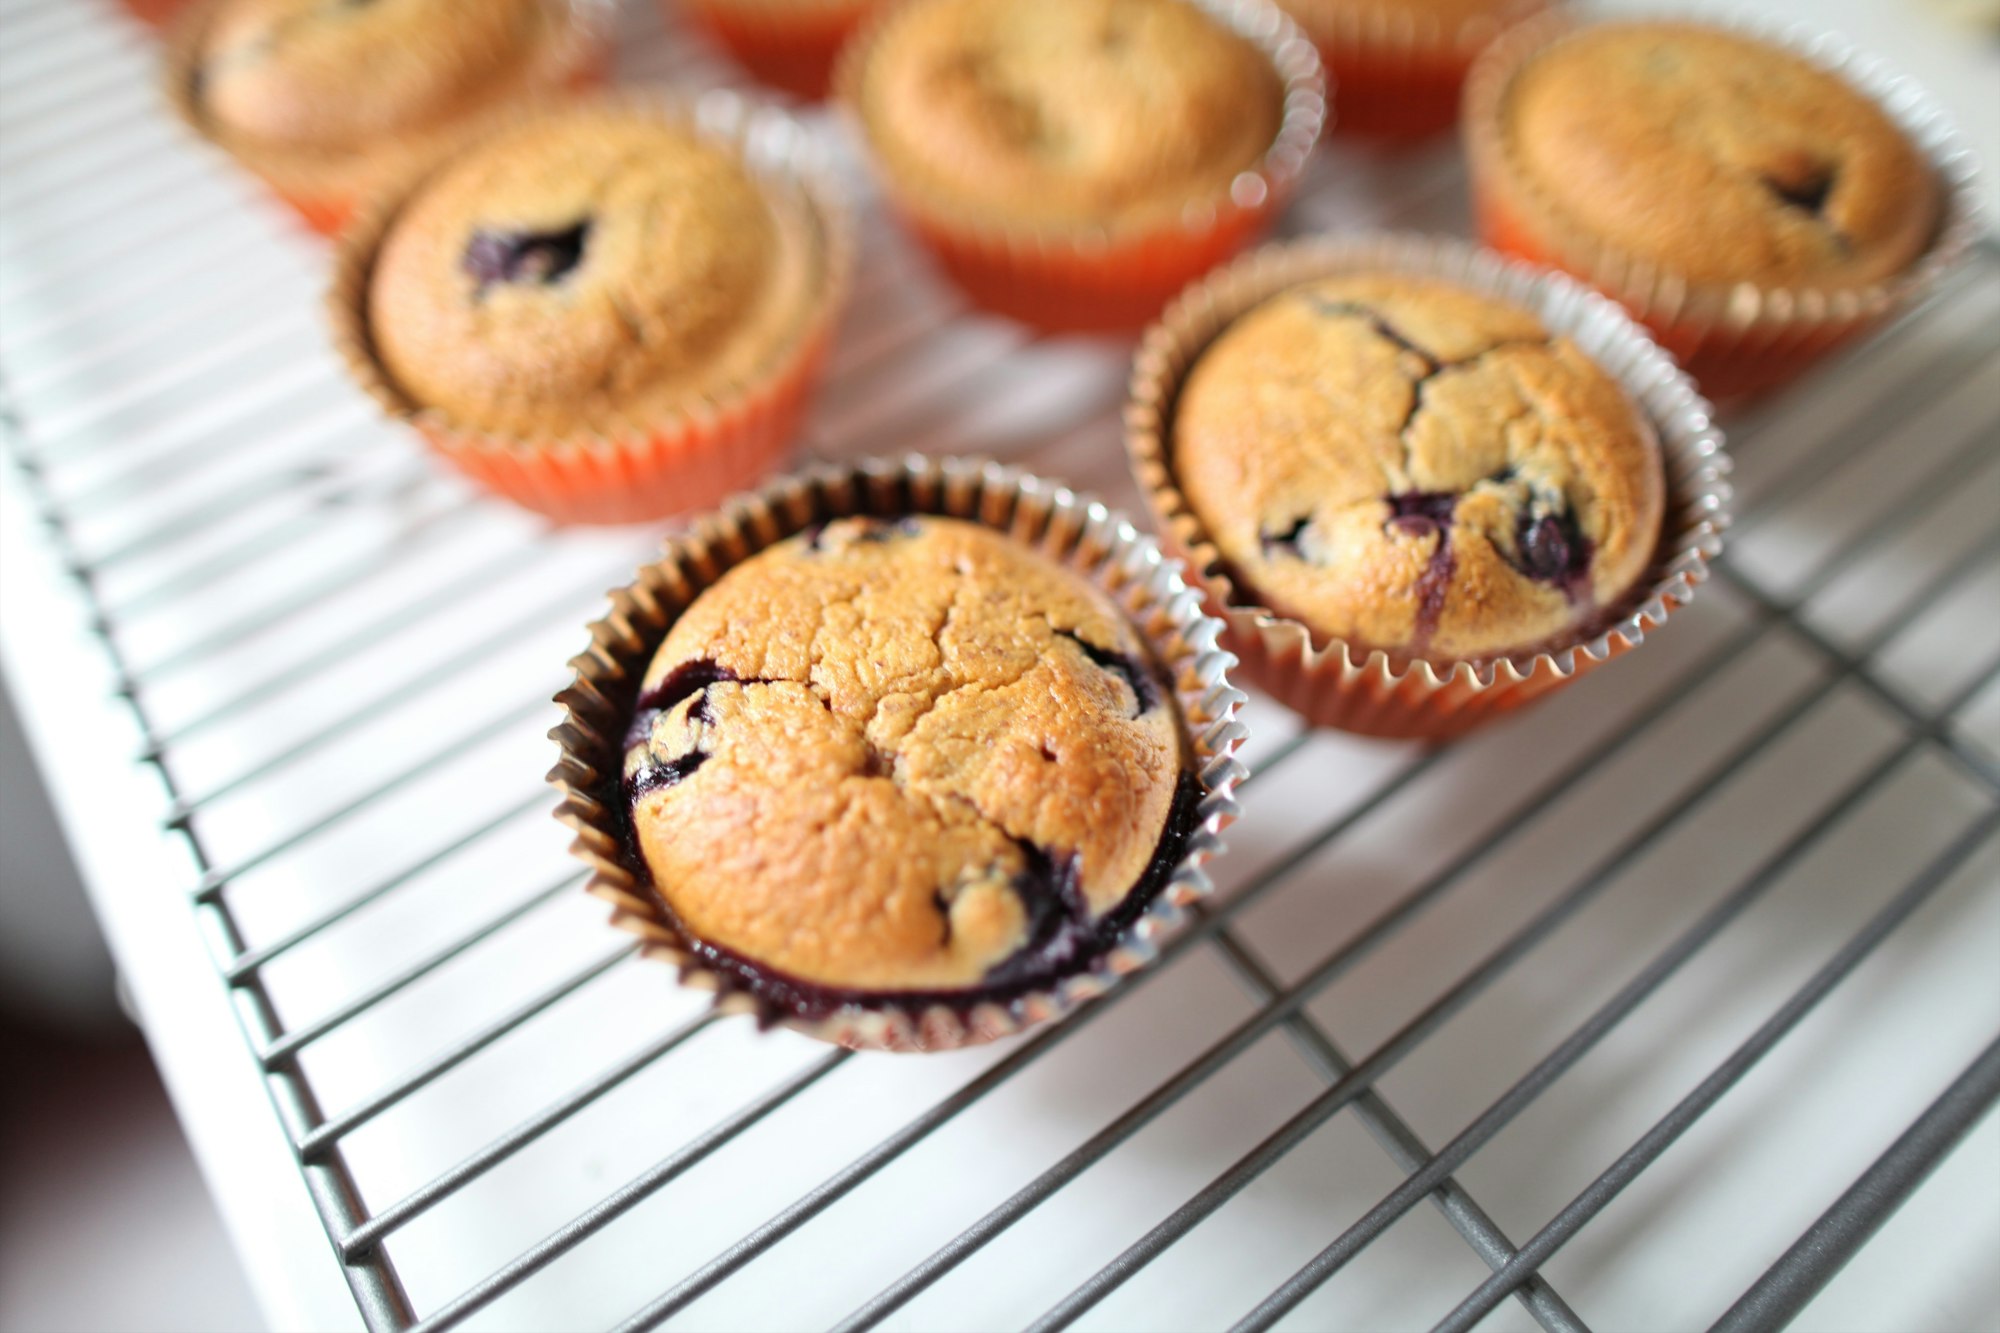 The recipe for these blueberry muffins:http://kaitlynraeann.com/recipes/blueberry-blender-muffins/